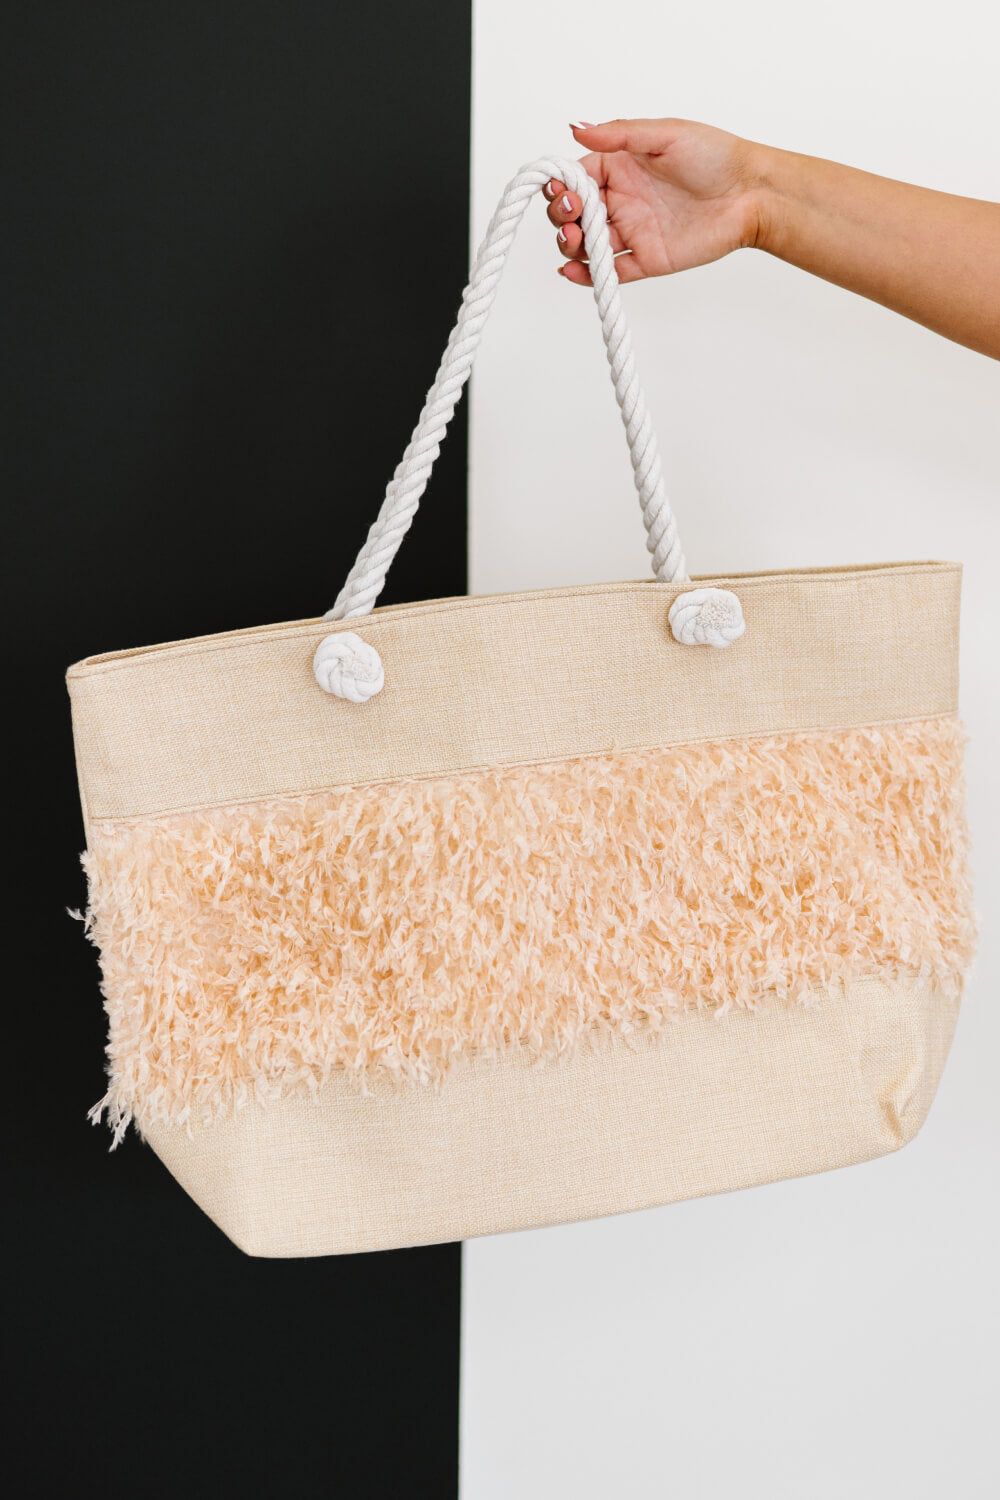 The Feathered Tote Bag in Blush